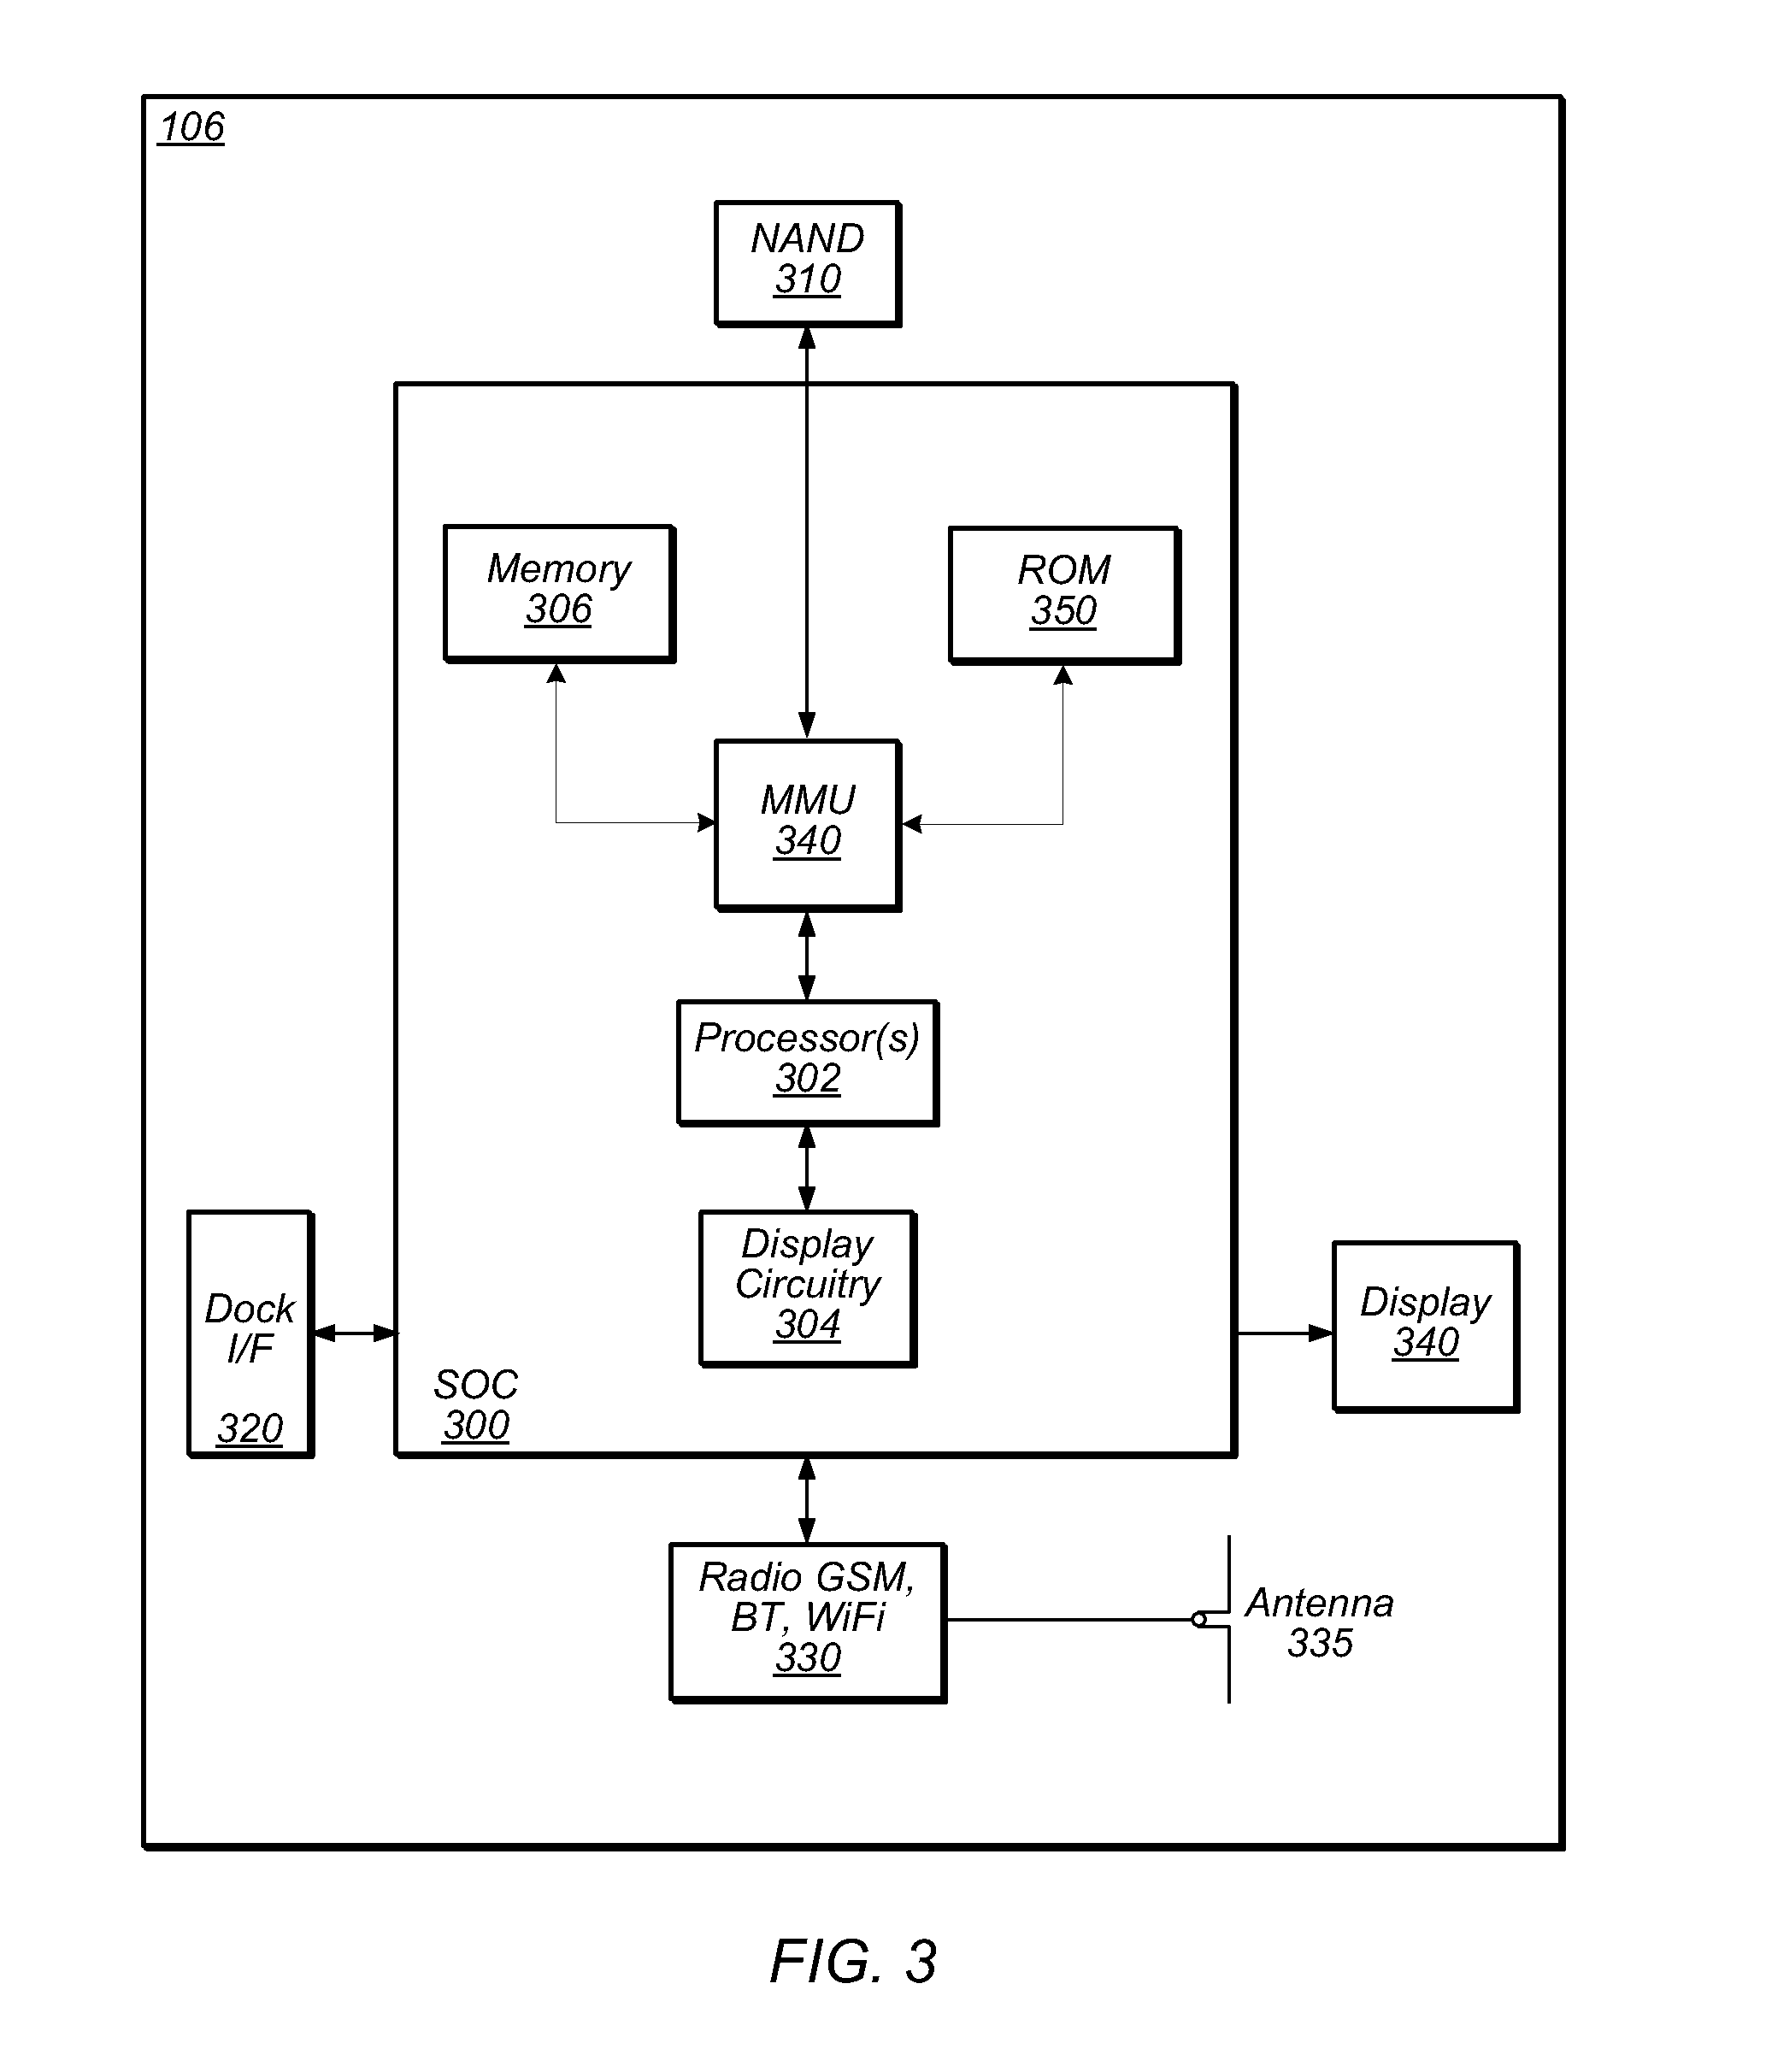 Synchronizing uplink and downlink transmissions in a wireless device